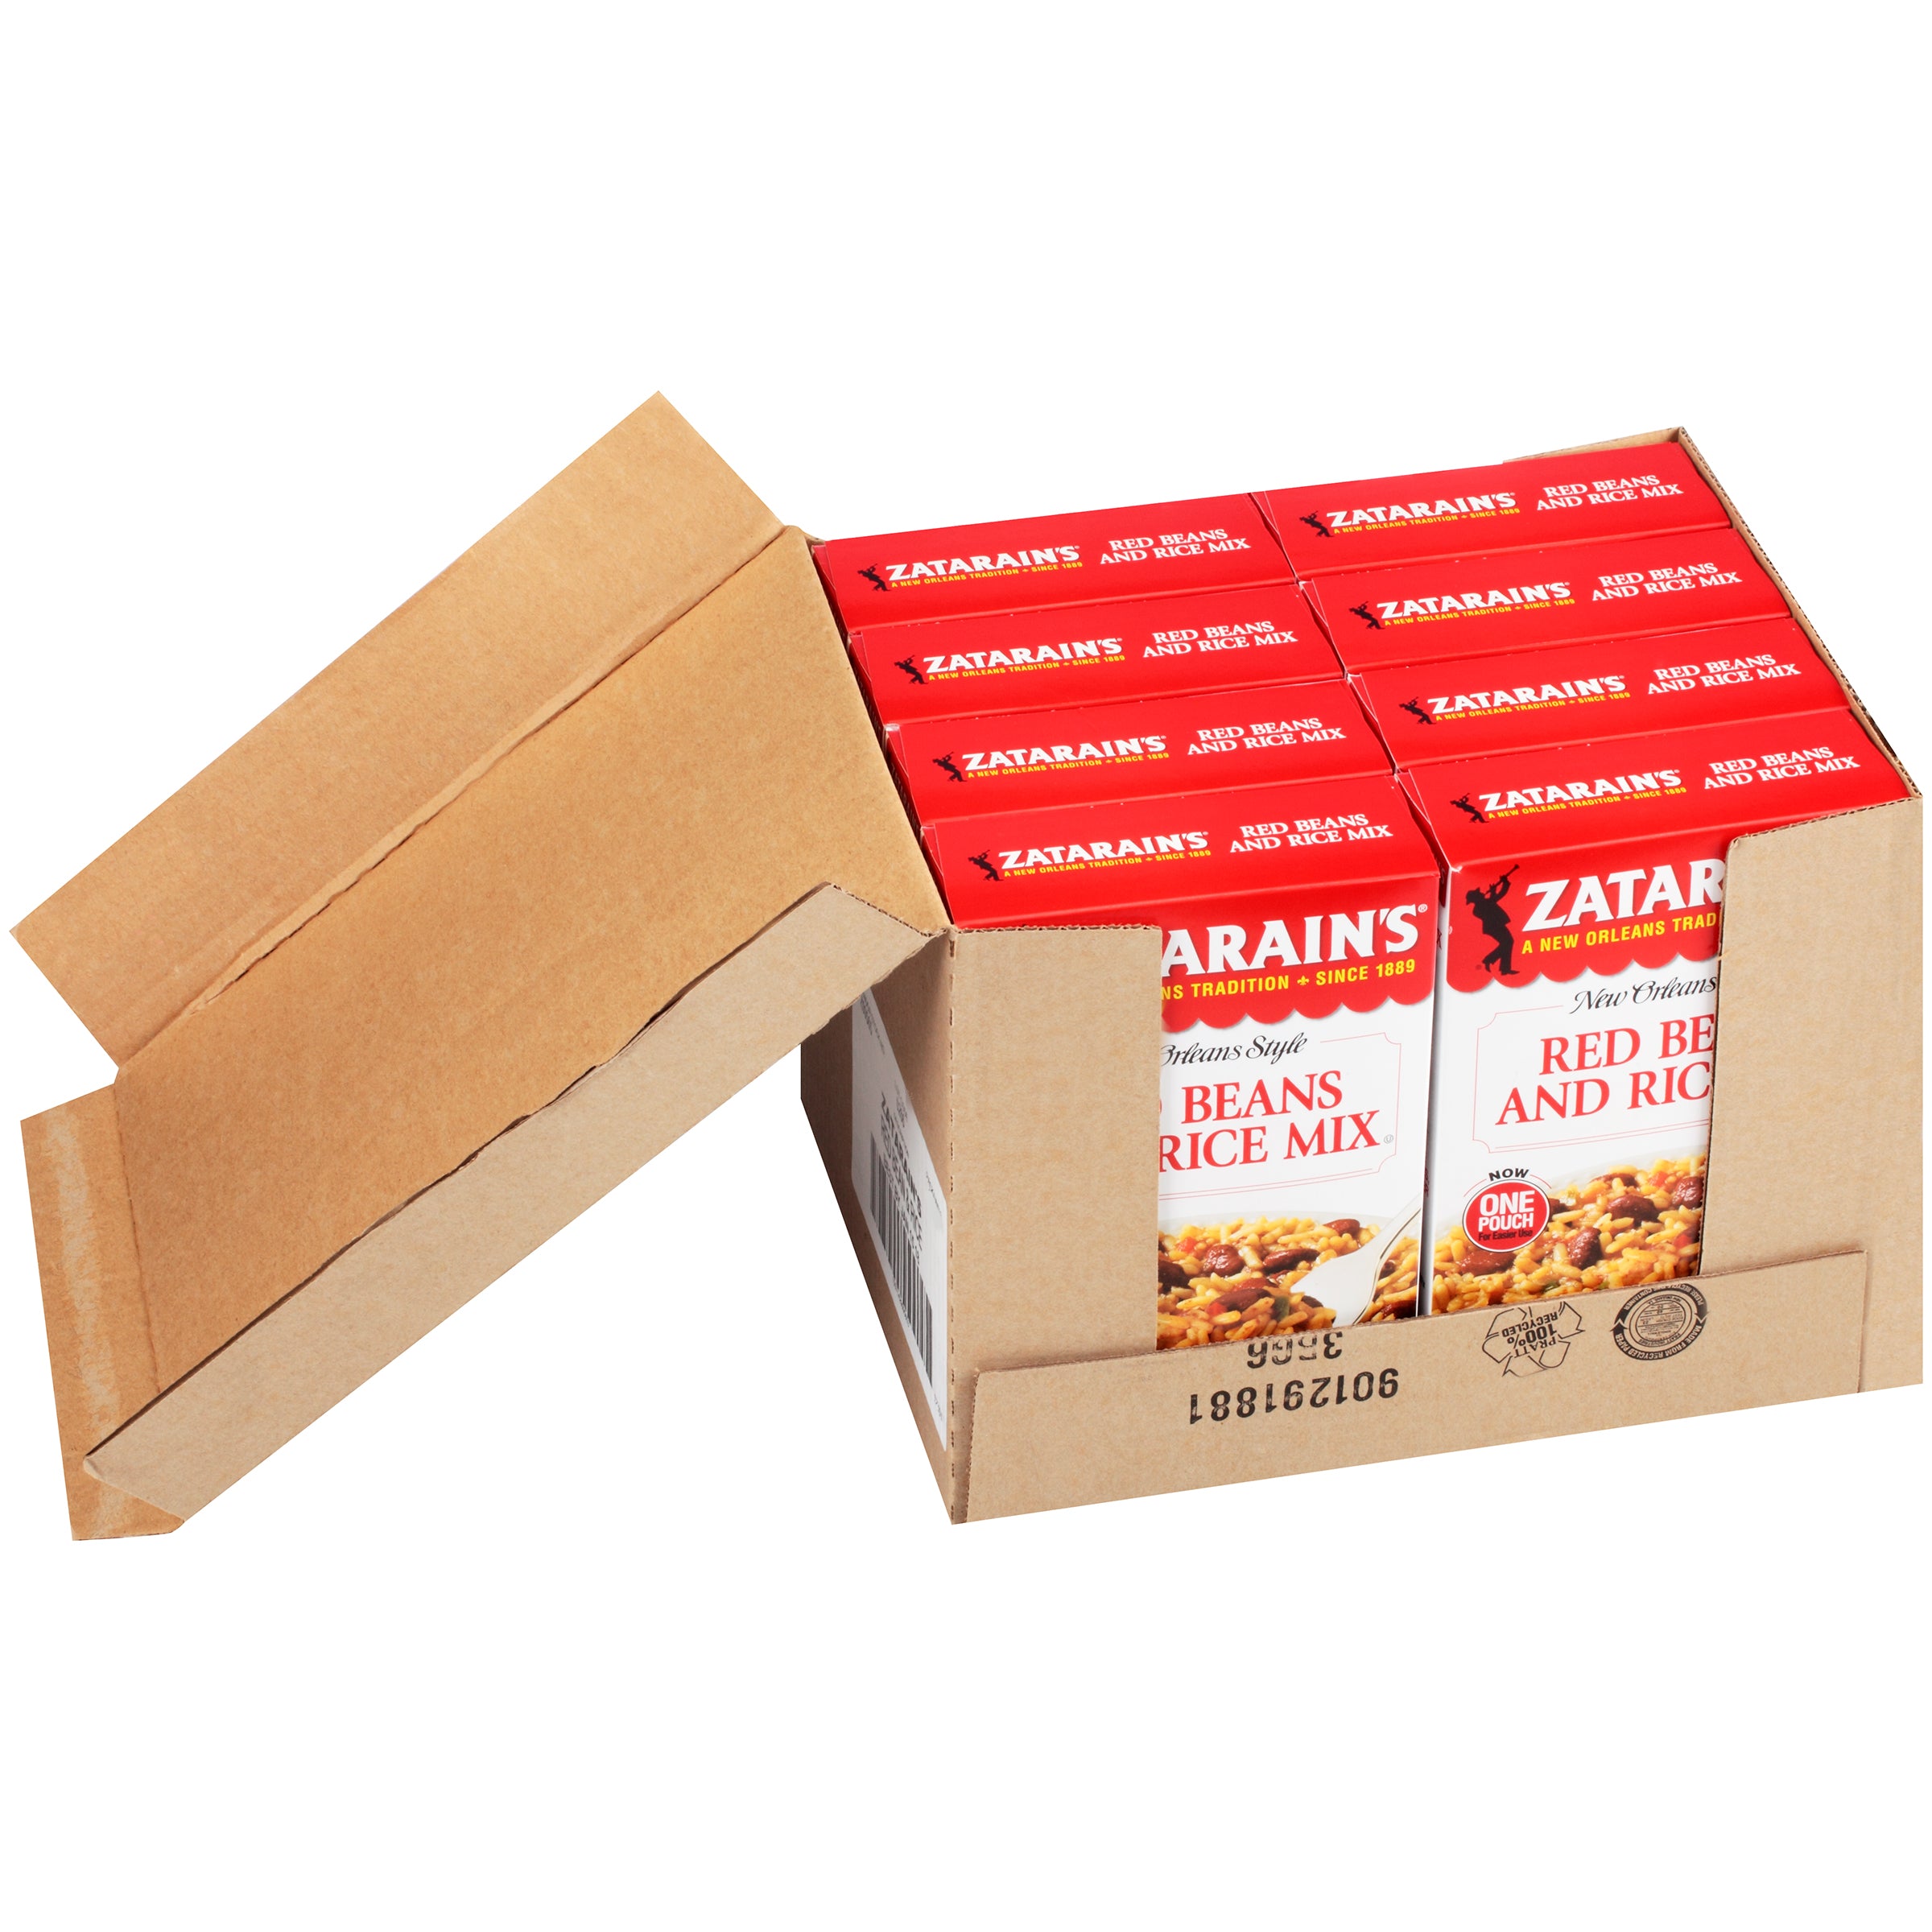 Zatarain's New Orleans Style Gumbo Mix With Rice, 7 Oz (Case of 4